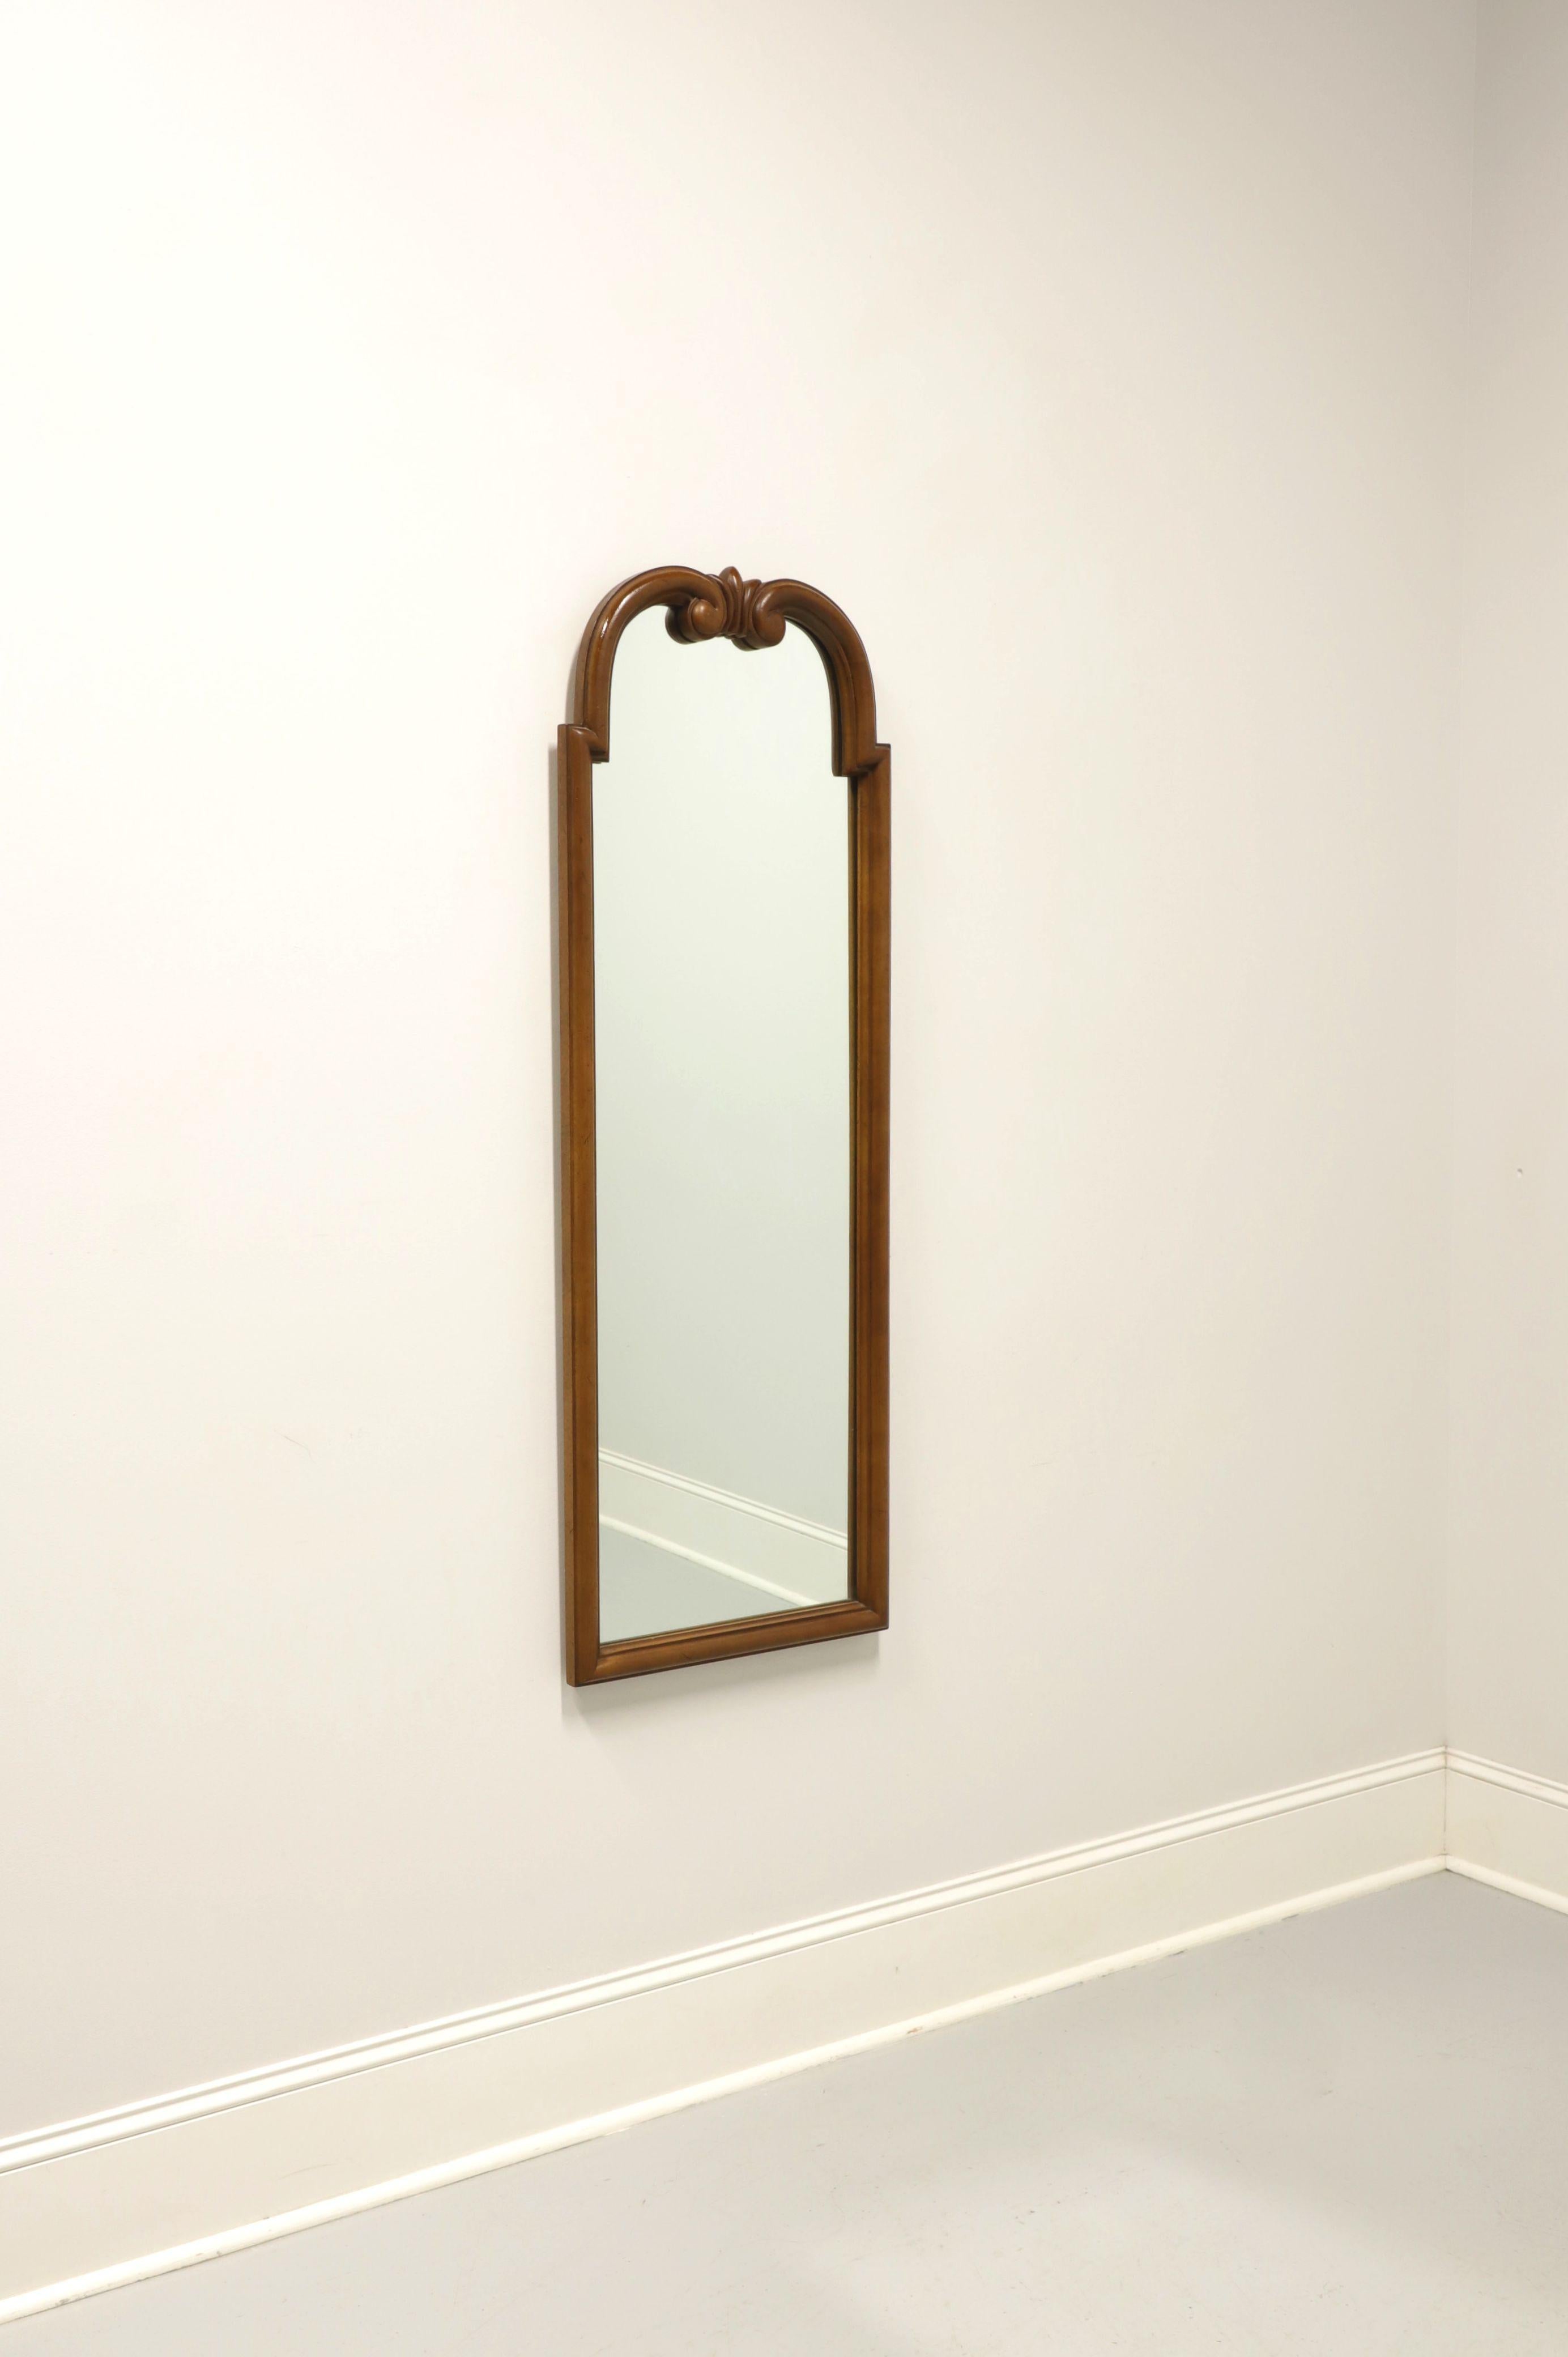 A Regency style wall mirror by Tomlinson Furniture. Mirrored glass in a walnut wood frame. Features arched top with a decorative fleur-de-lis to center top. Made in North Carolina, USA, in the mid 20th century.

Measures: 18.5 W 2 D 52.75 H,